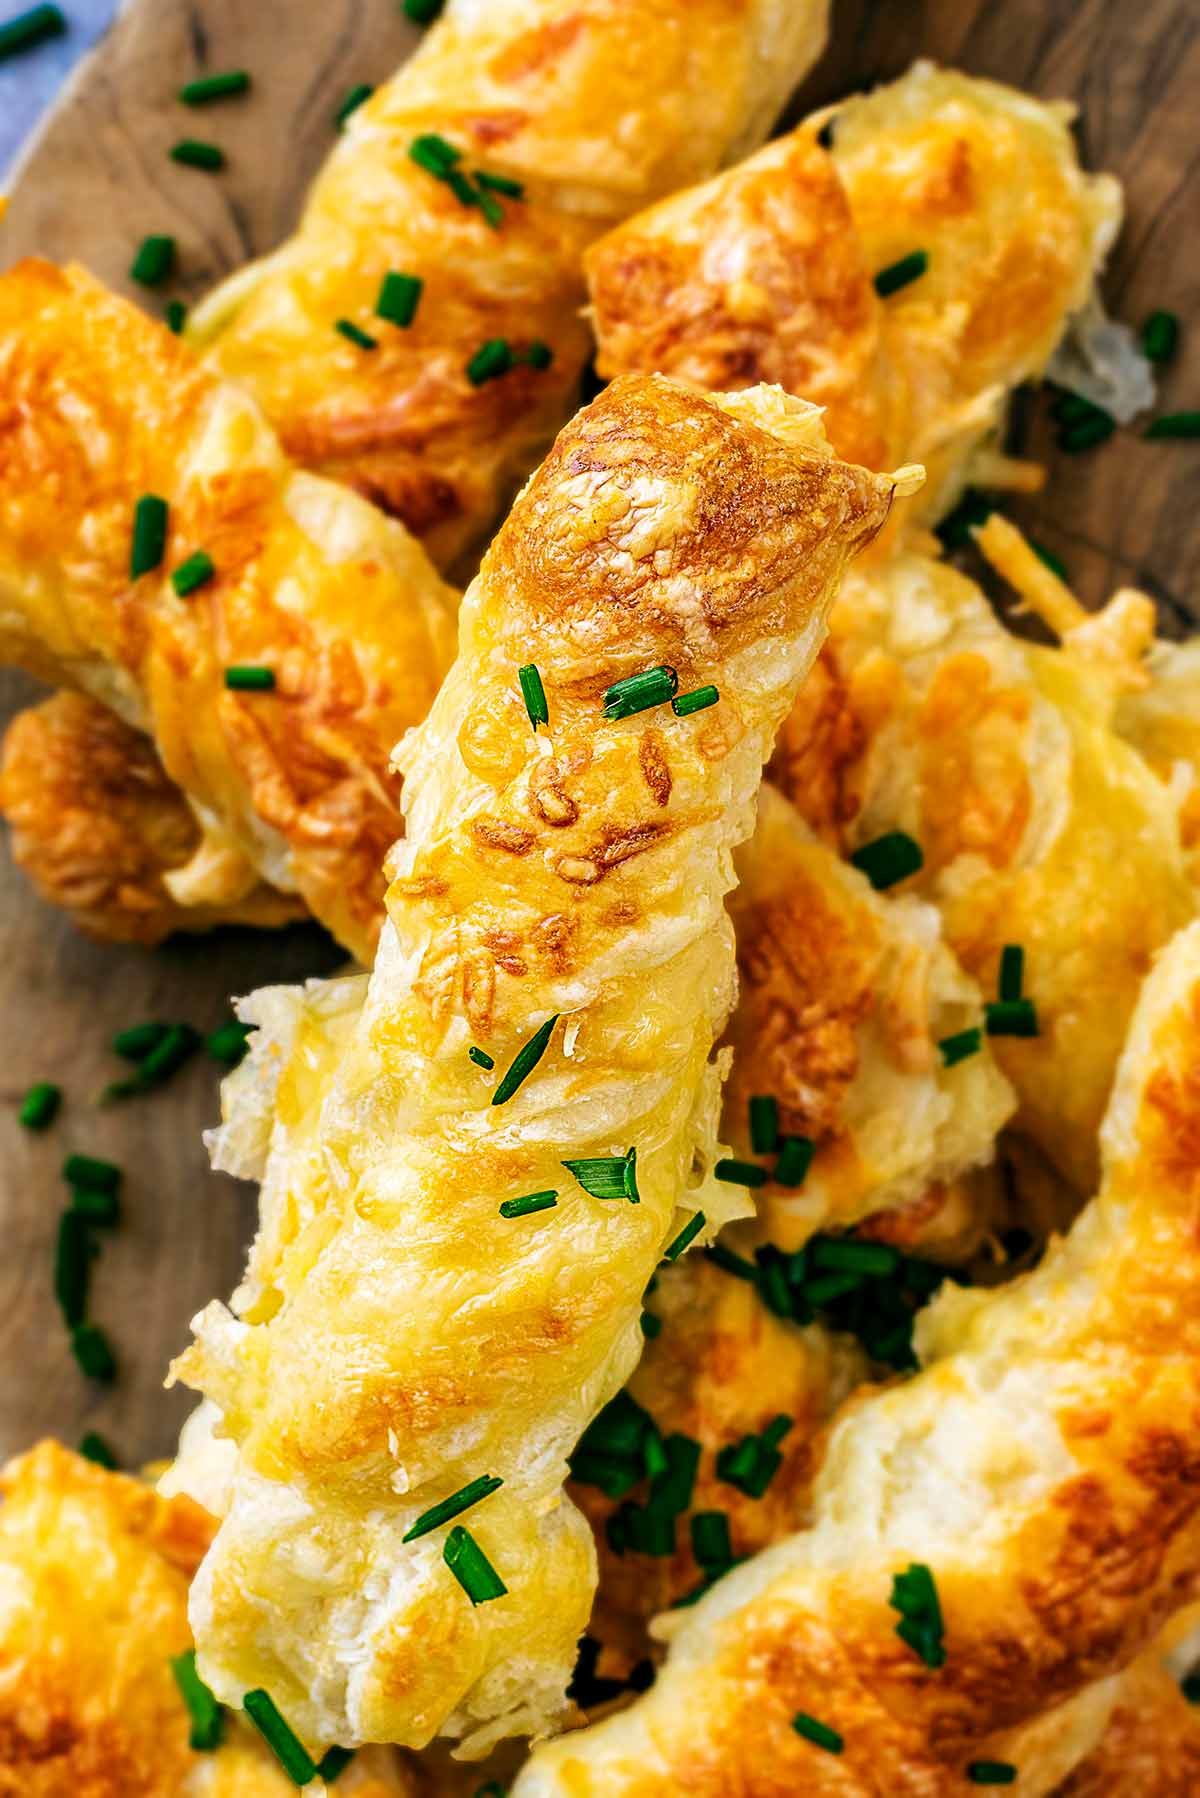 Cheese straws wiht chopped chives sprinkled over them.